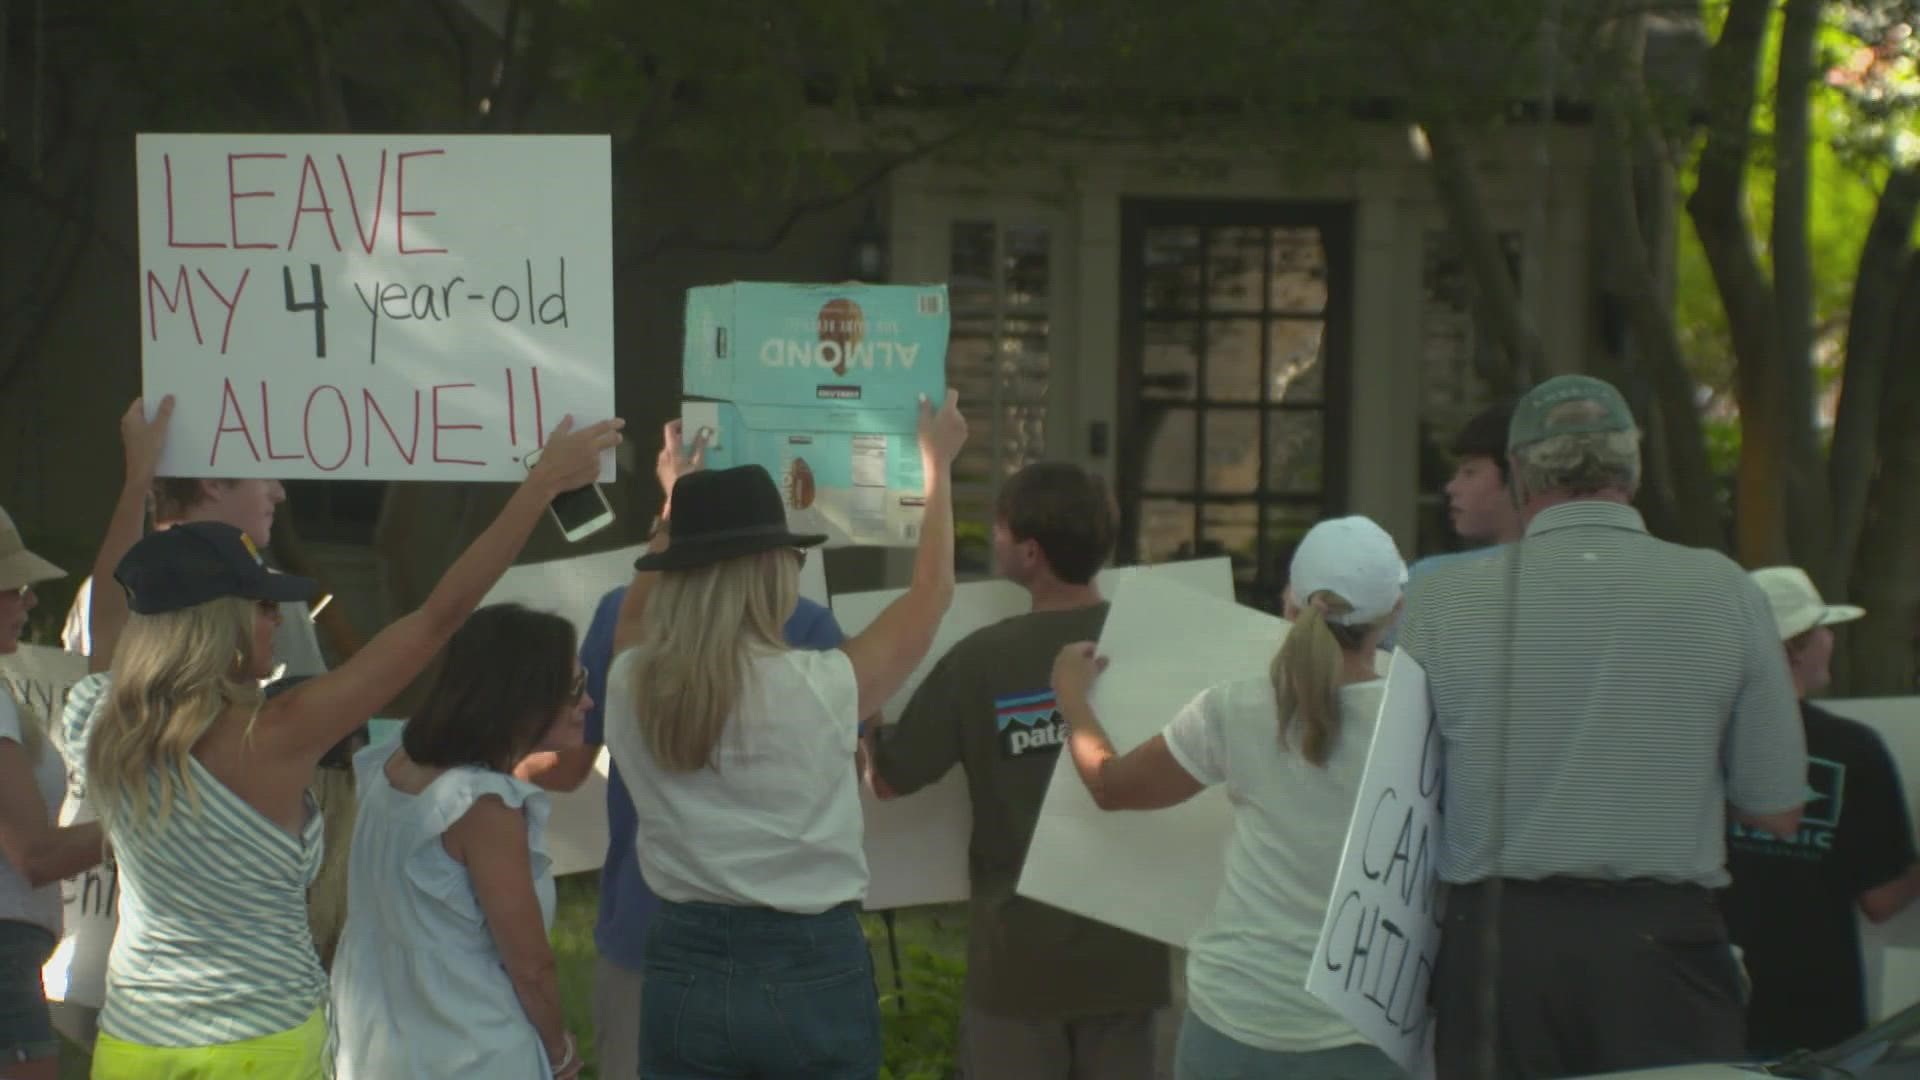 More than 75 people showed up to Dallas County Judge Clay Jenkins' home on Thursday evening to protest his emergency order requiring masks.